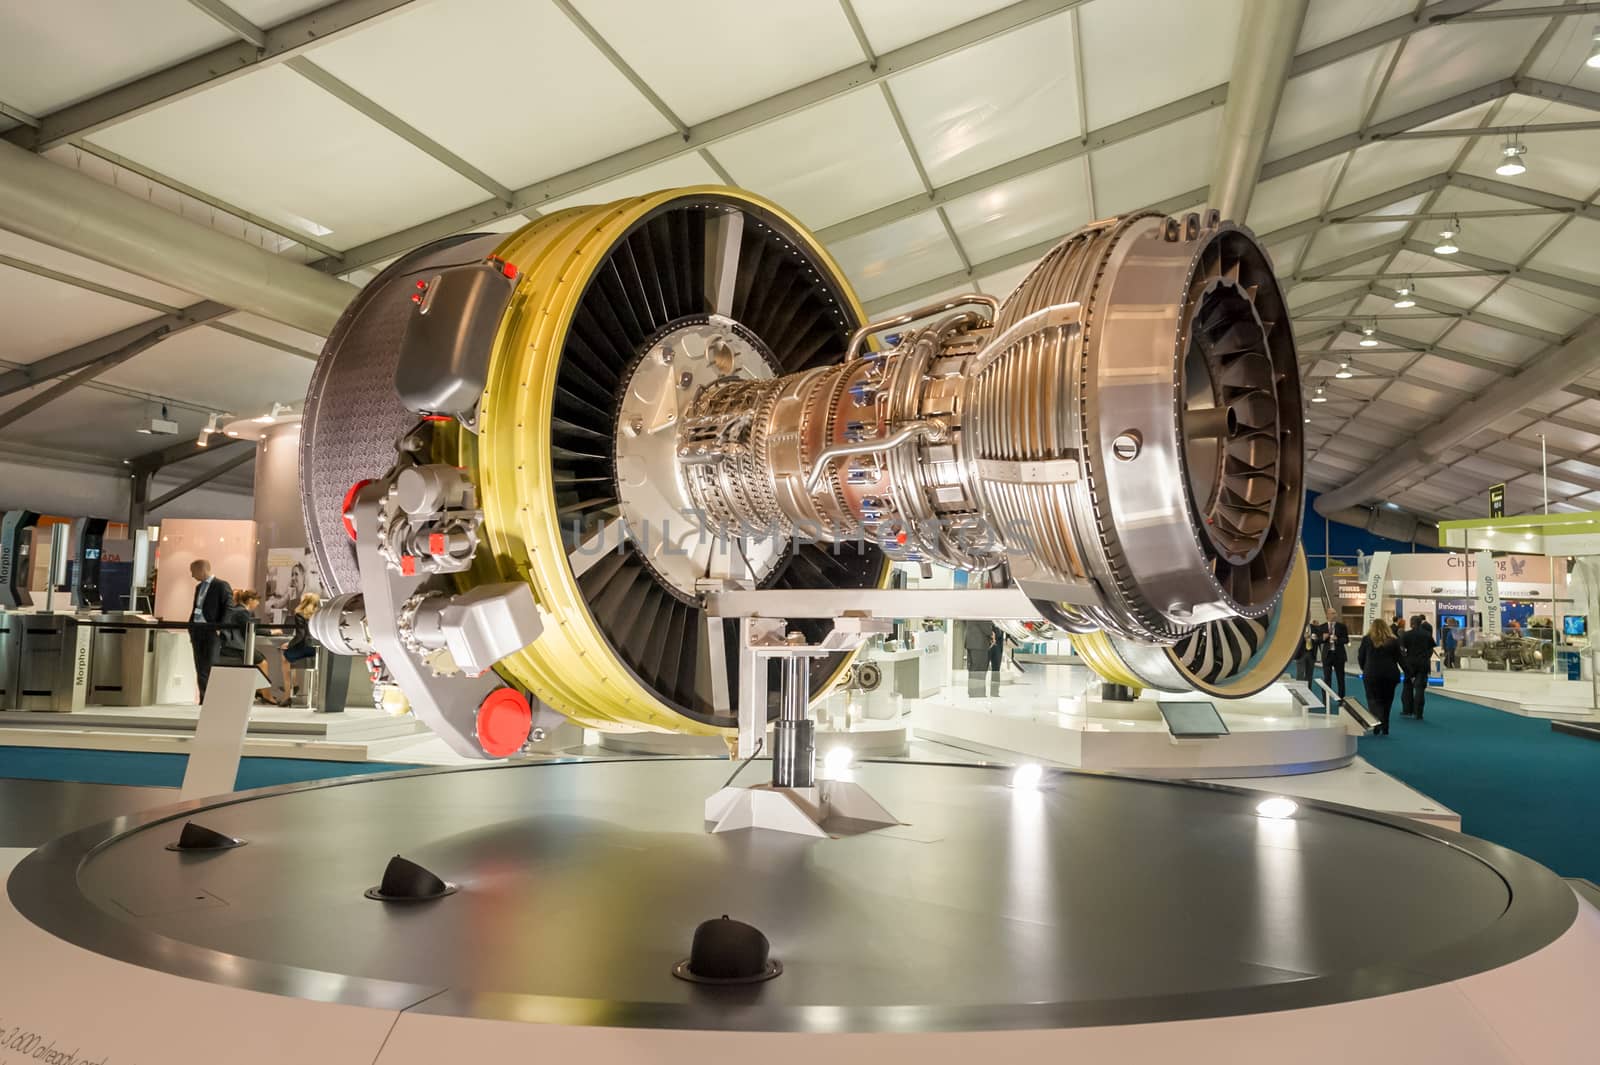 Farnborough, UK - July 12, 2012: Exhibition stands displaying large jet engines and other components used in the aviation industry at the Farnborough International Airshow, UK